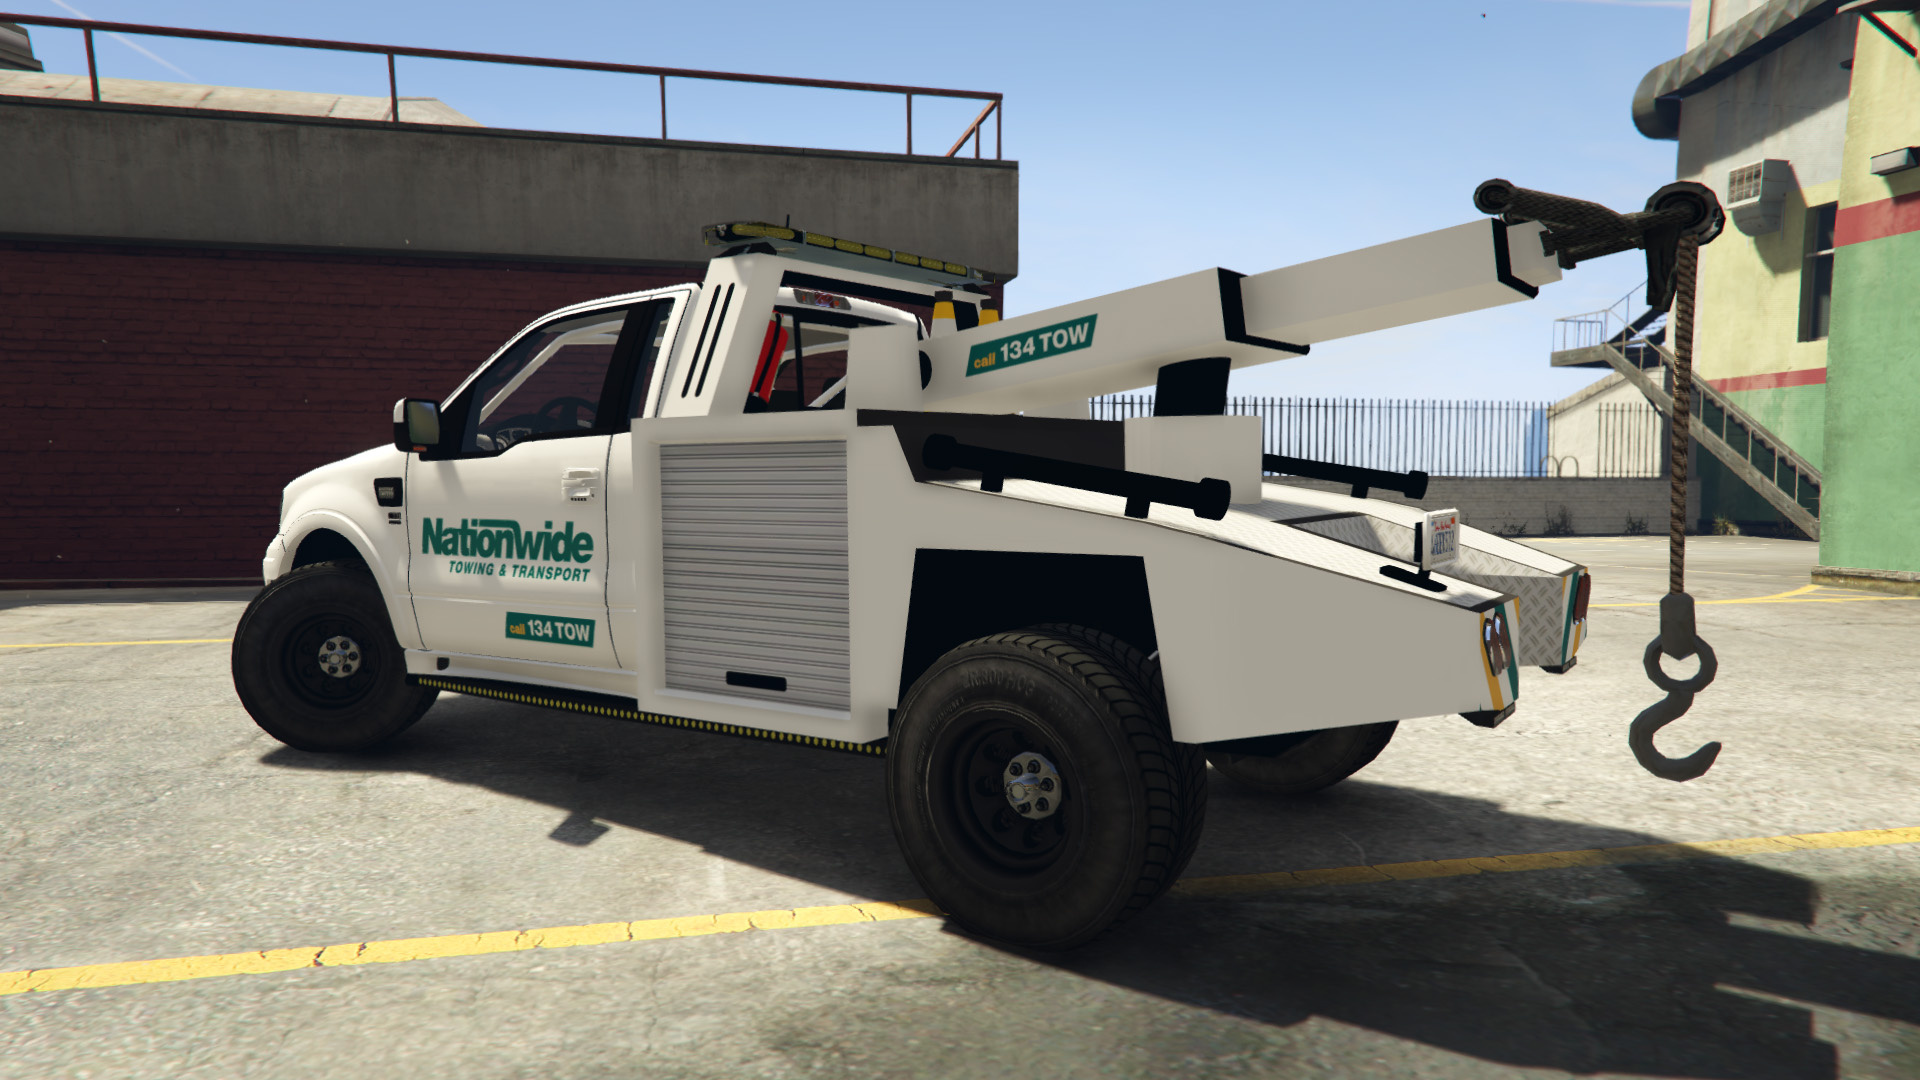 Nationwide Towing Towtruck Skin Ford S331 Gta5